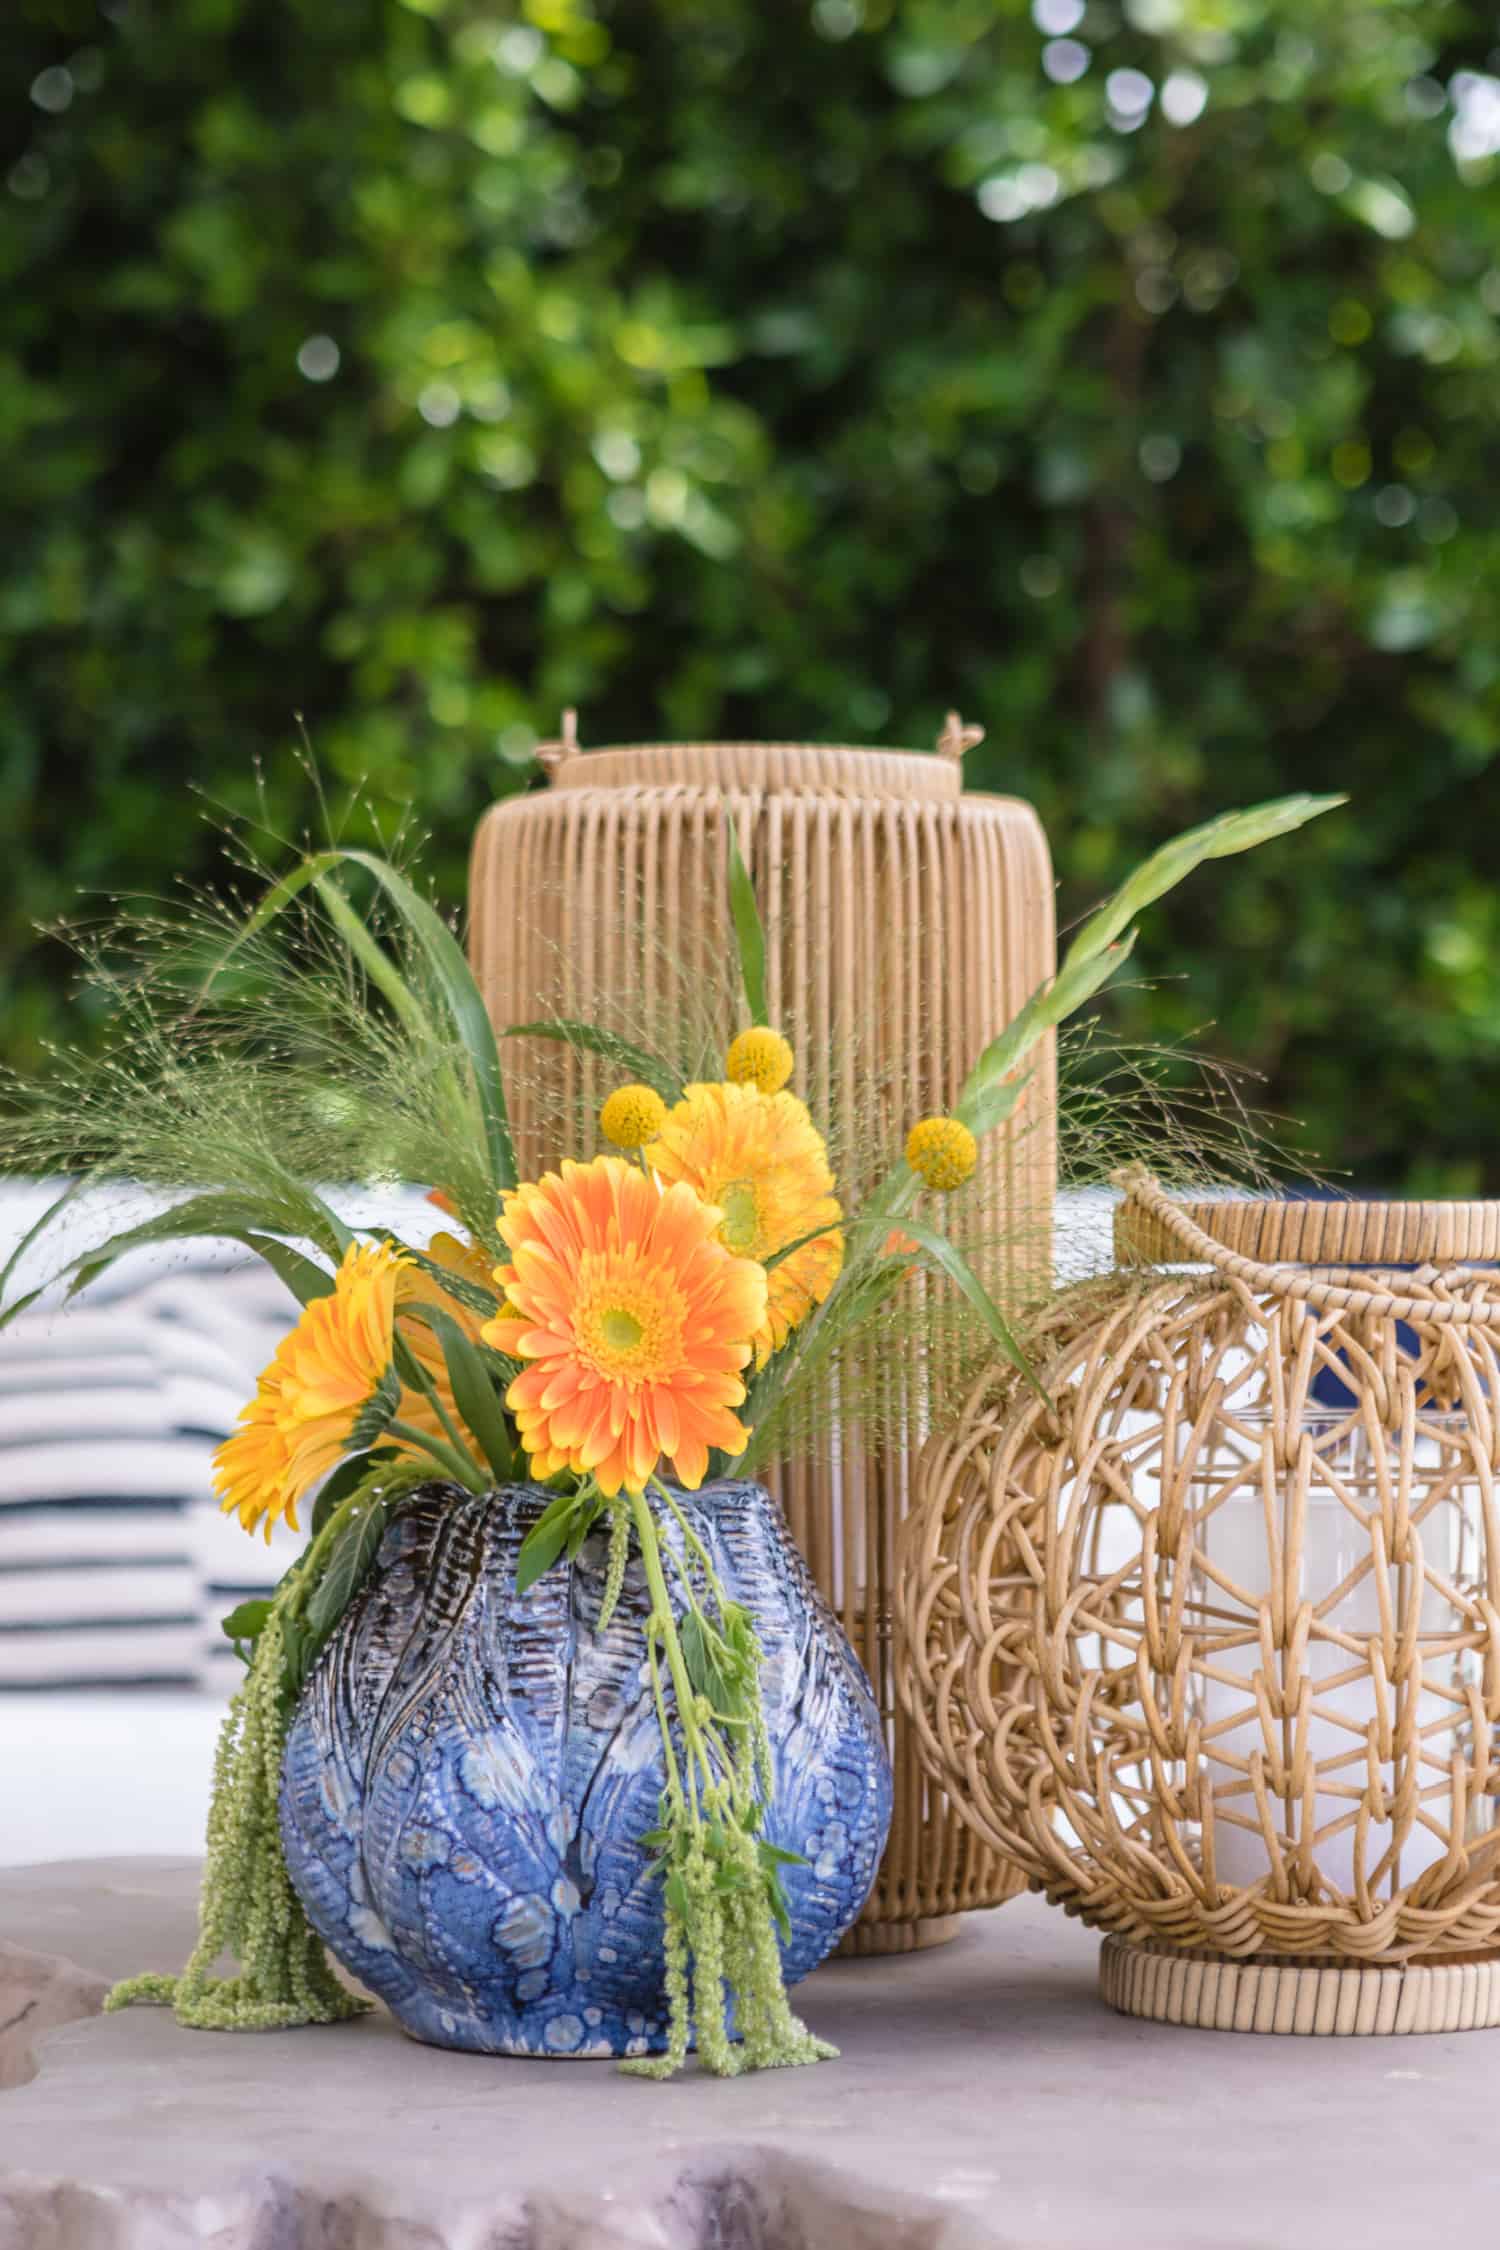 Close in shot of a simple centerpiece consisting of a blue vase with flowers, and two lanterns made of natural materials.